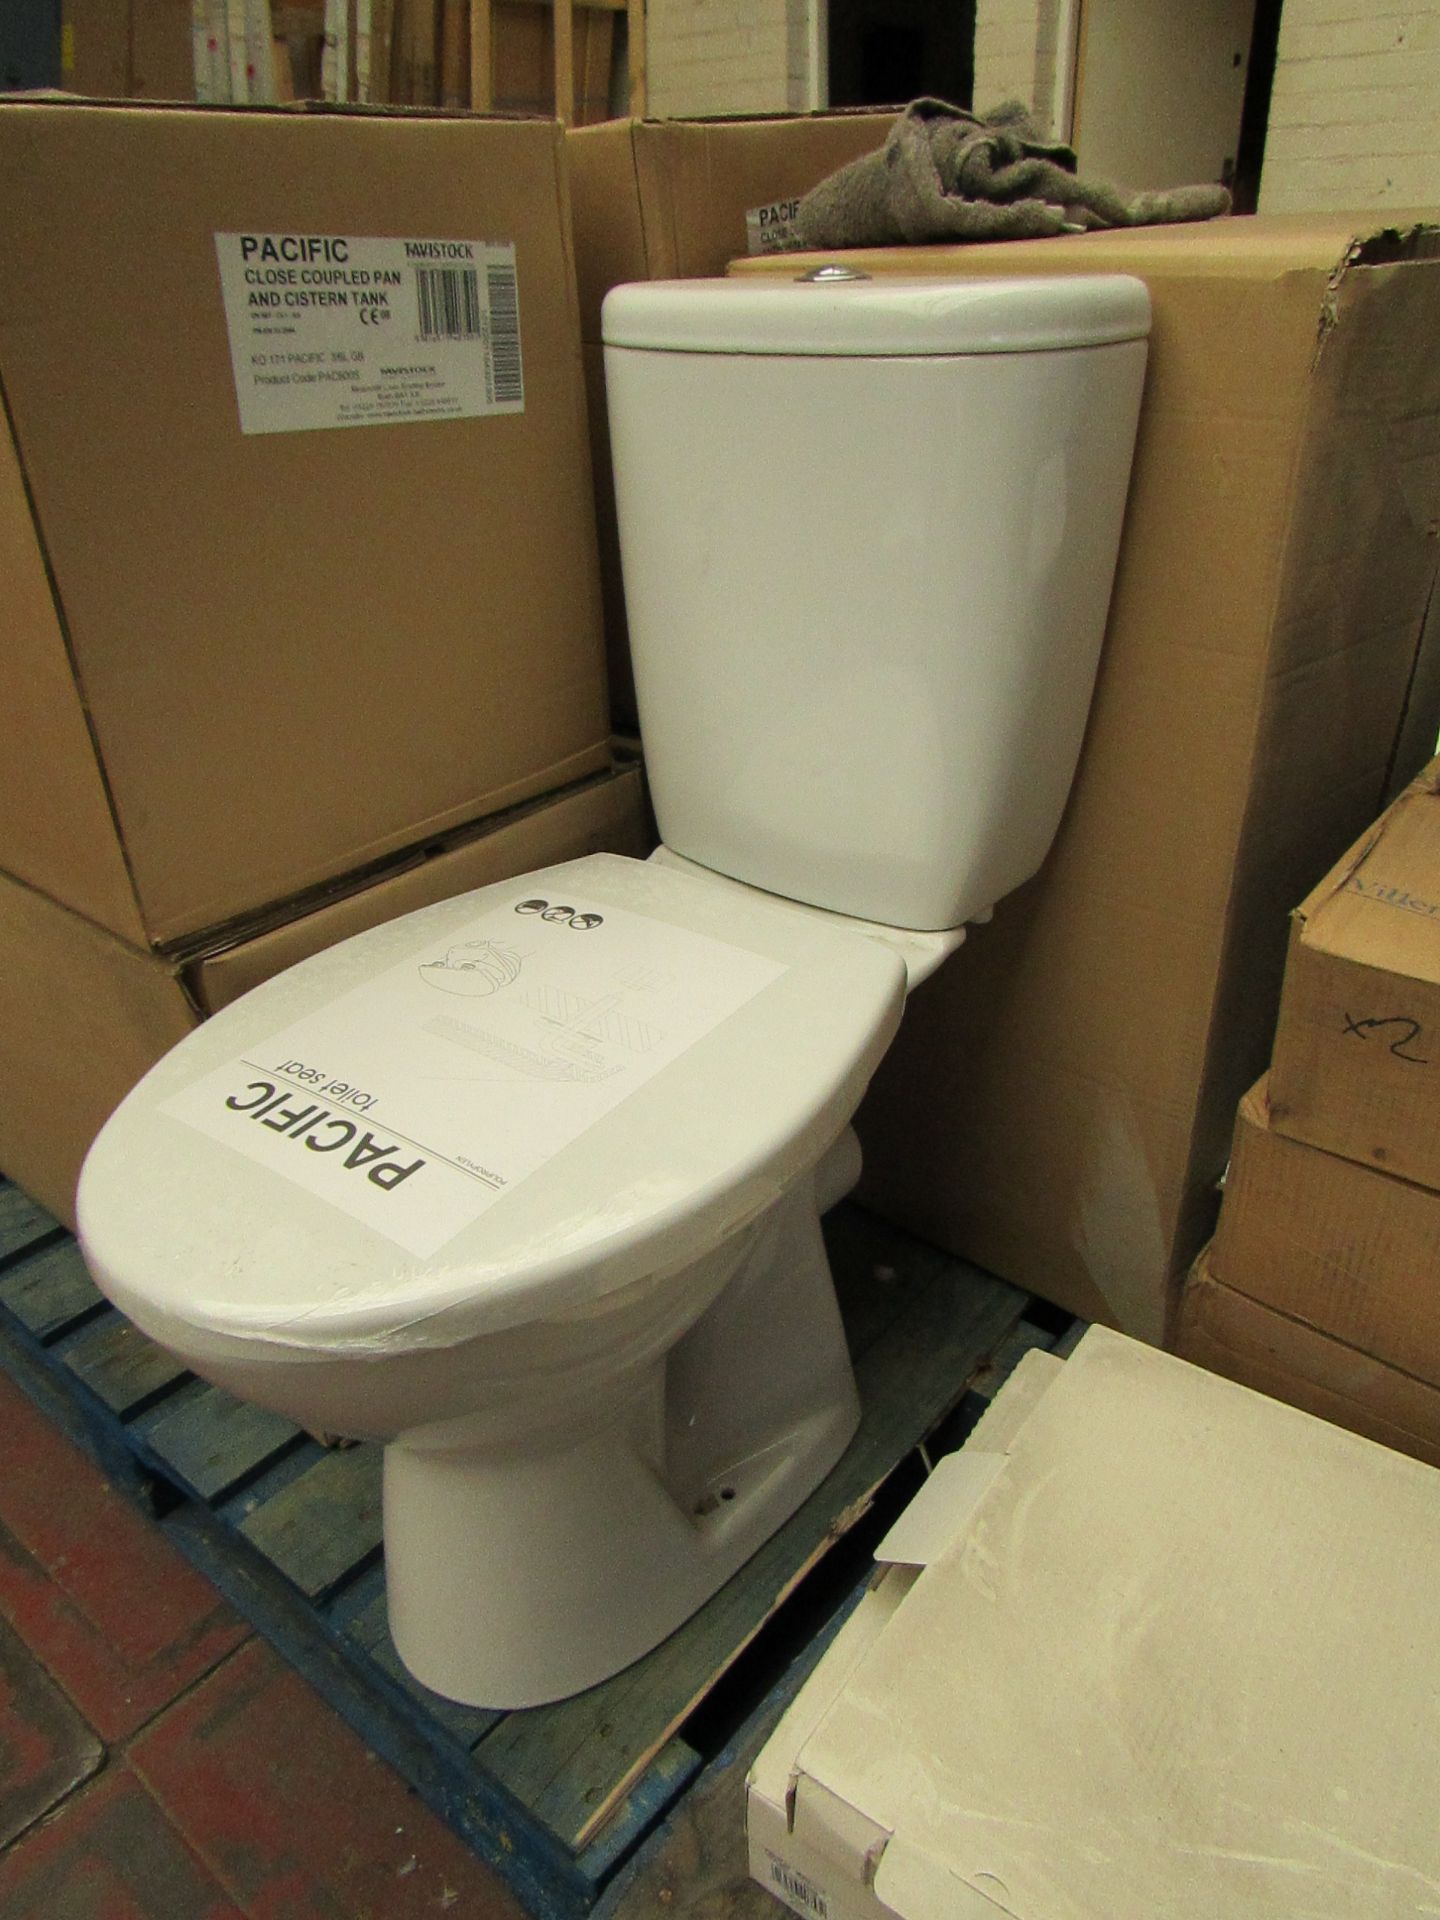 Pacific close coupled toilet pan, cistern to match (with flush system) & toilet seat to match. All